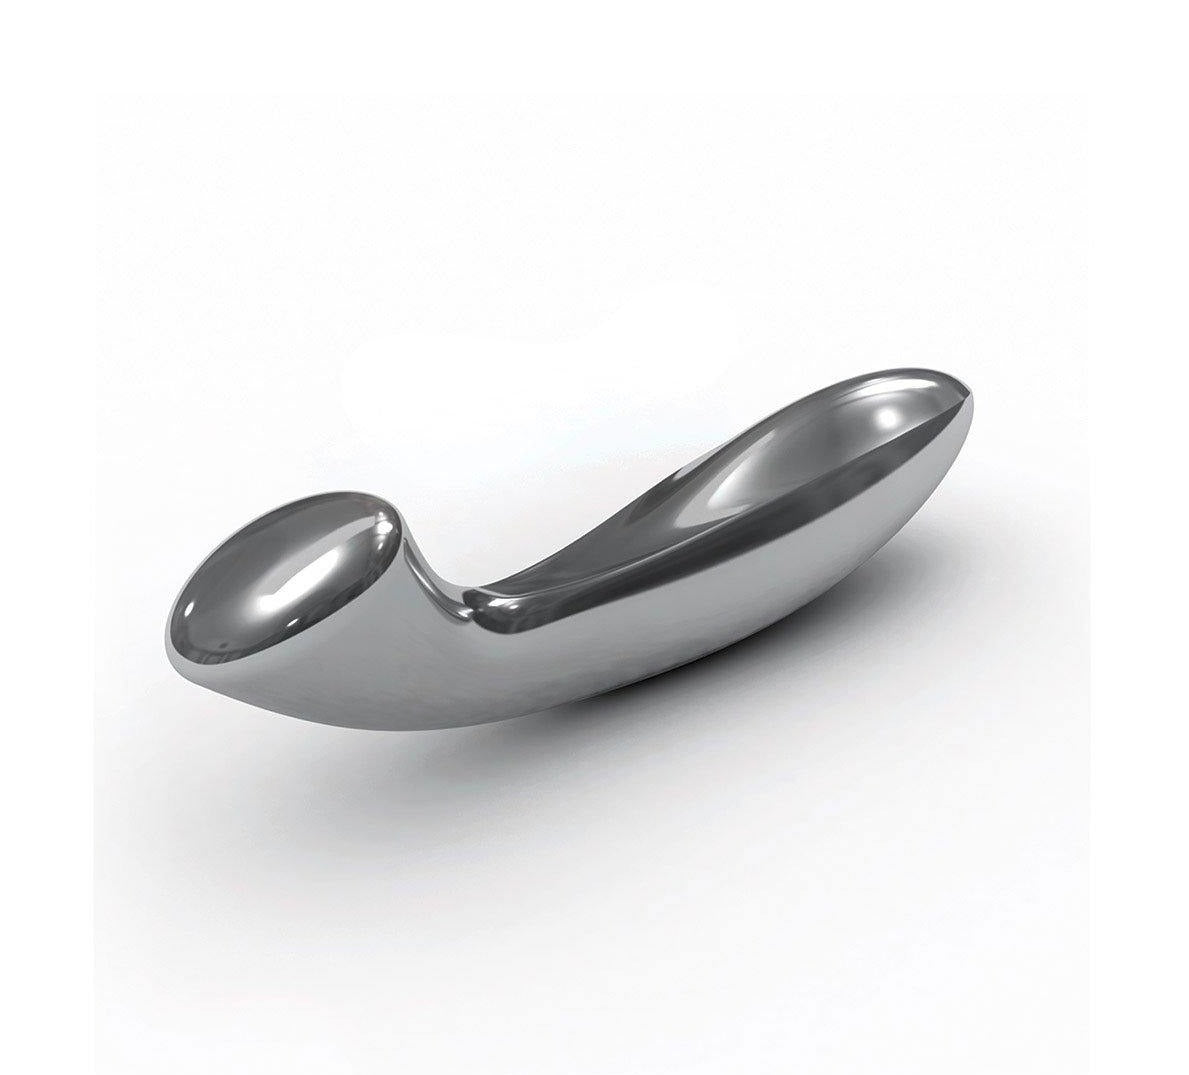 Lelo Olga Stainless Steel - Buy At Luxury Toy X - Free 3-Day Shipping